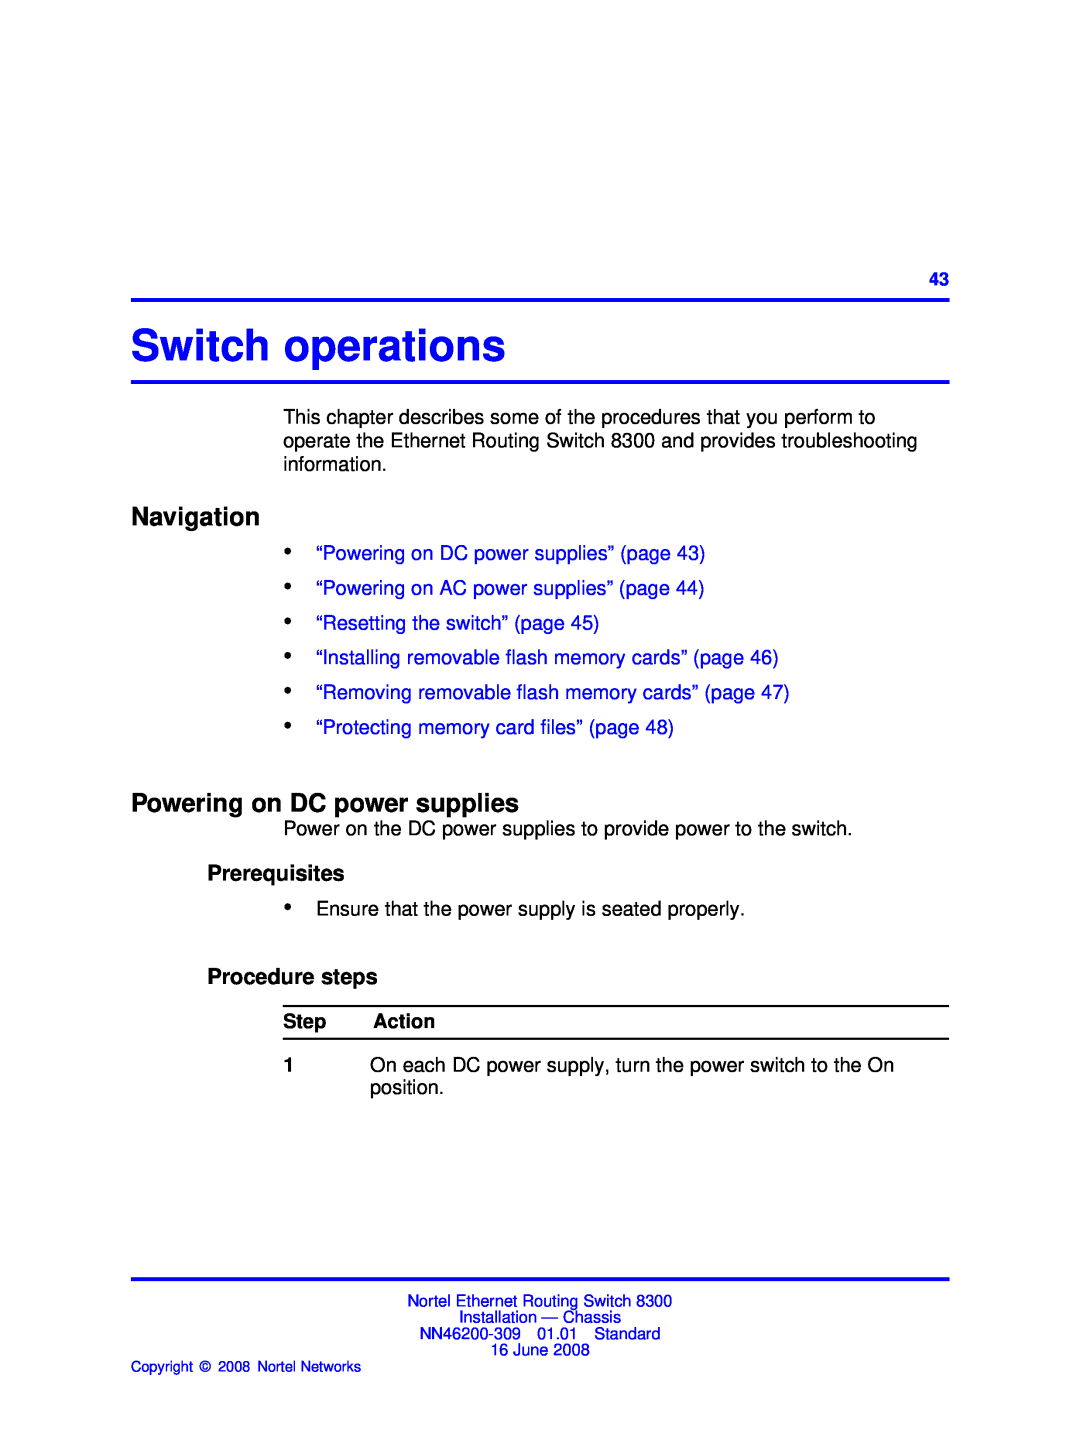 Nortel Networks 8306 Switch operations, “Powering on DC power supplies” page, “Protecting memory card files” page 